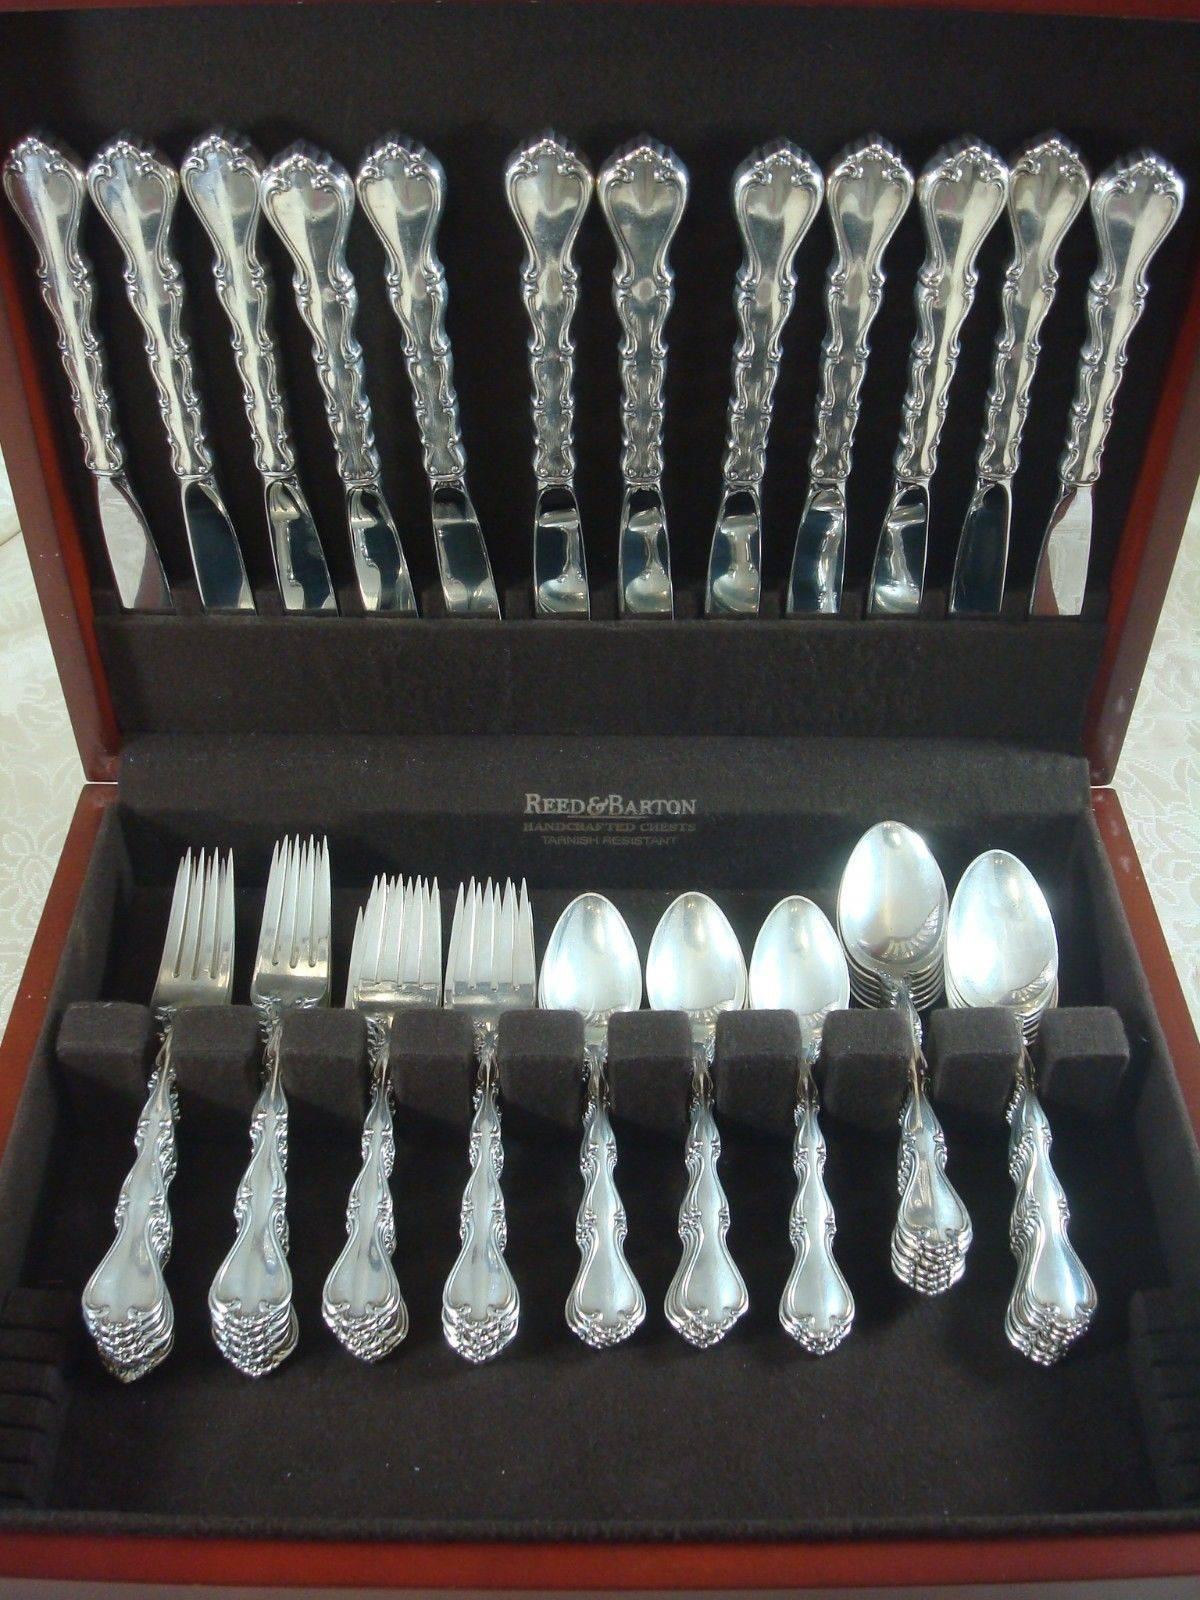 Country Manor by Towle sterling silver flatware set, 60 pieces. This pattern resembles Queen Elizabeth-I by Towle. This set includes: 

12 knives, 9 1/8